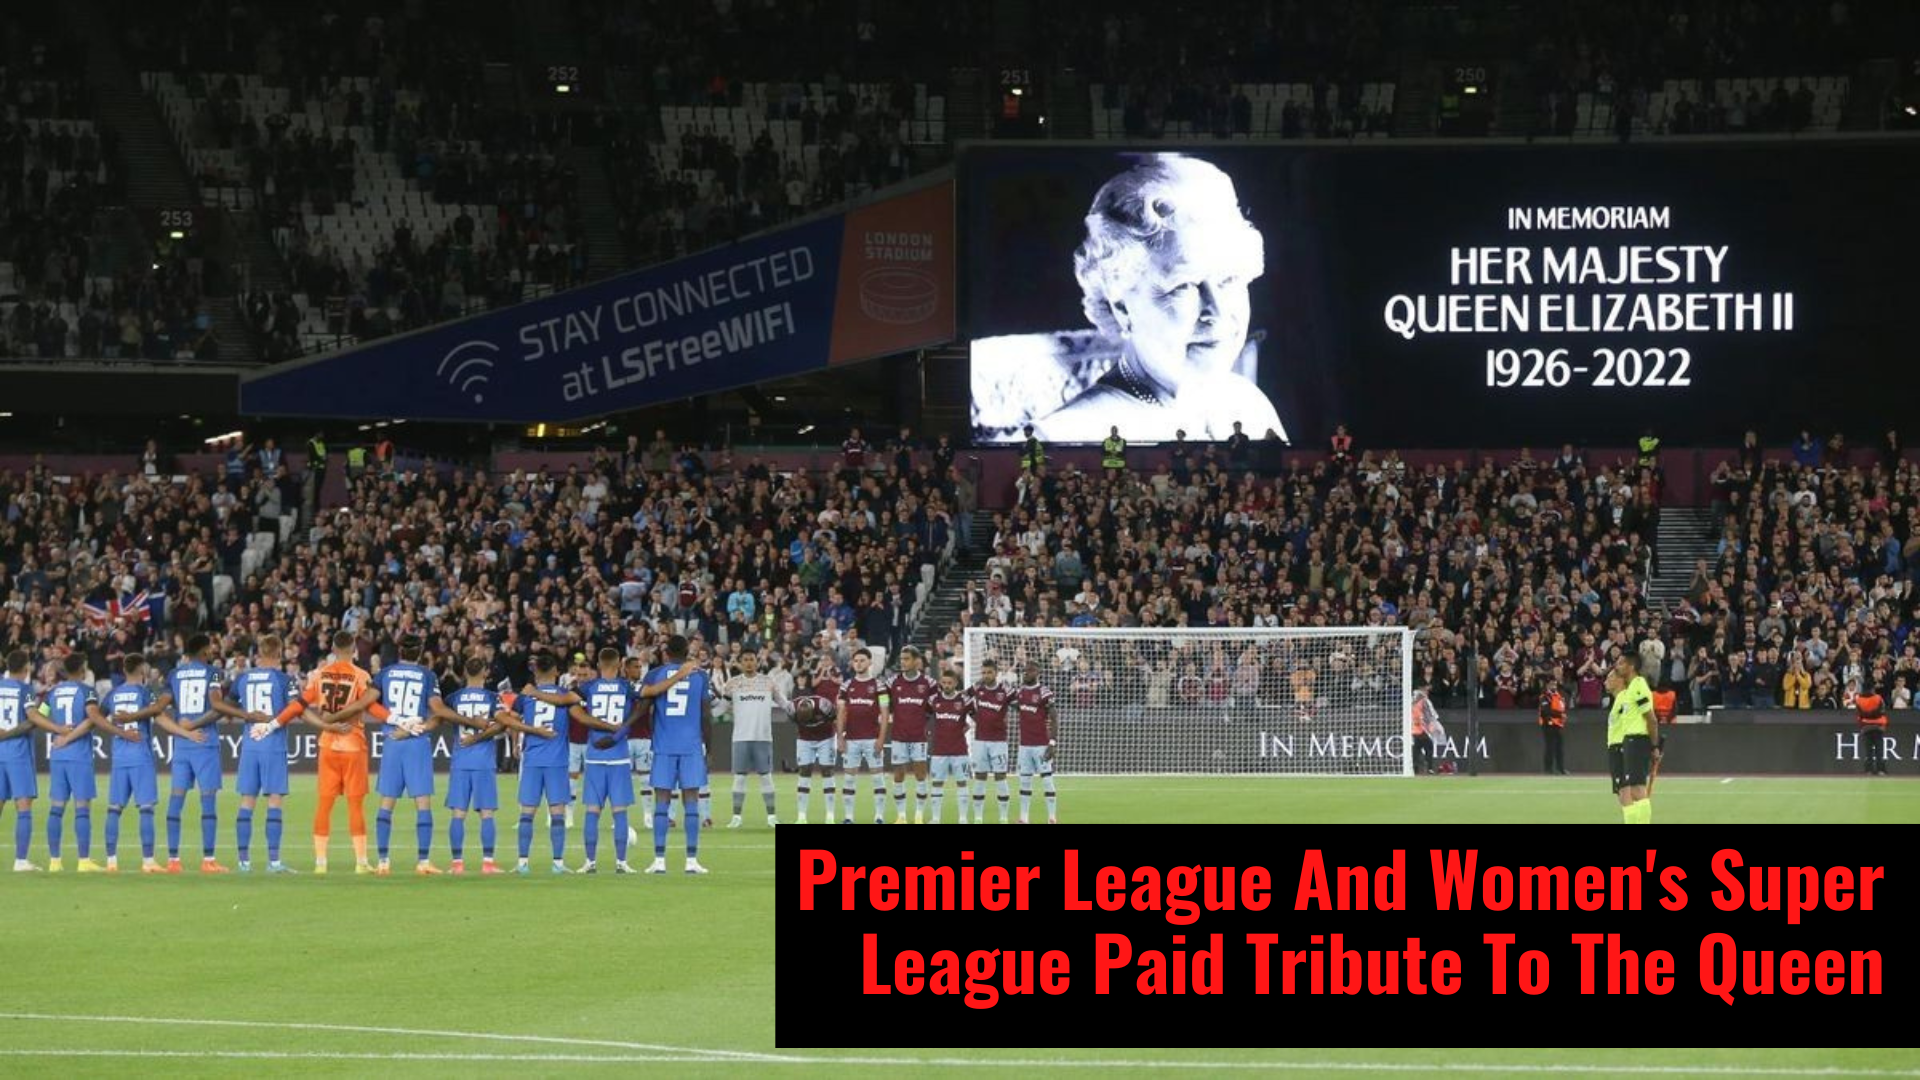 Premier League And Women's Super League Pay Tribute To The Queen